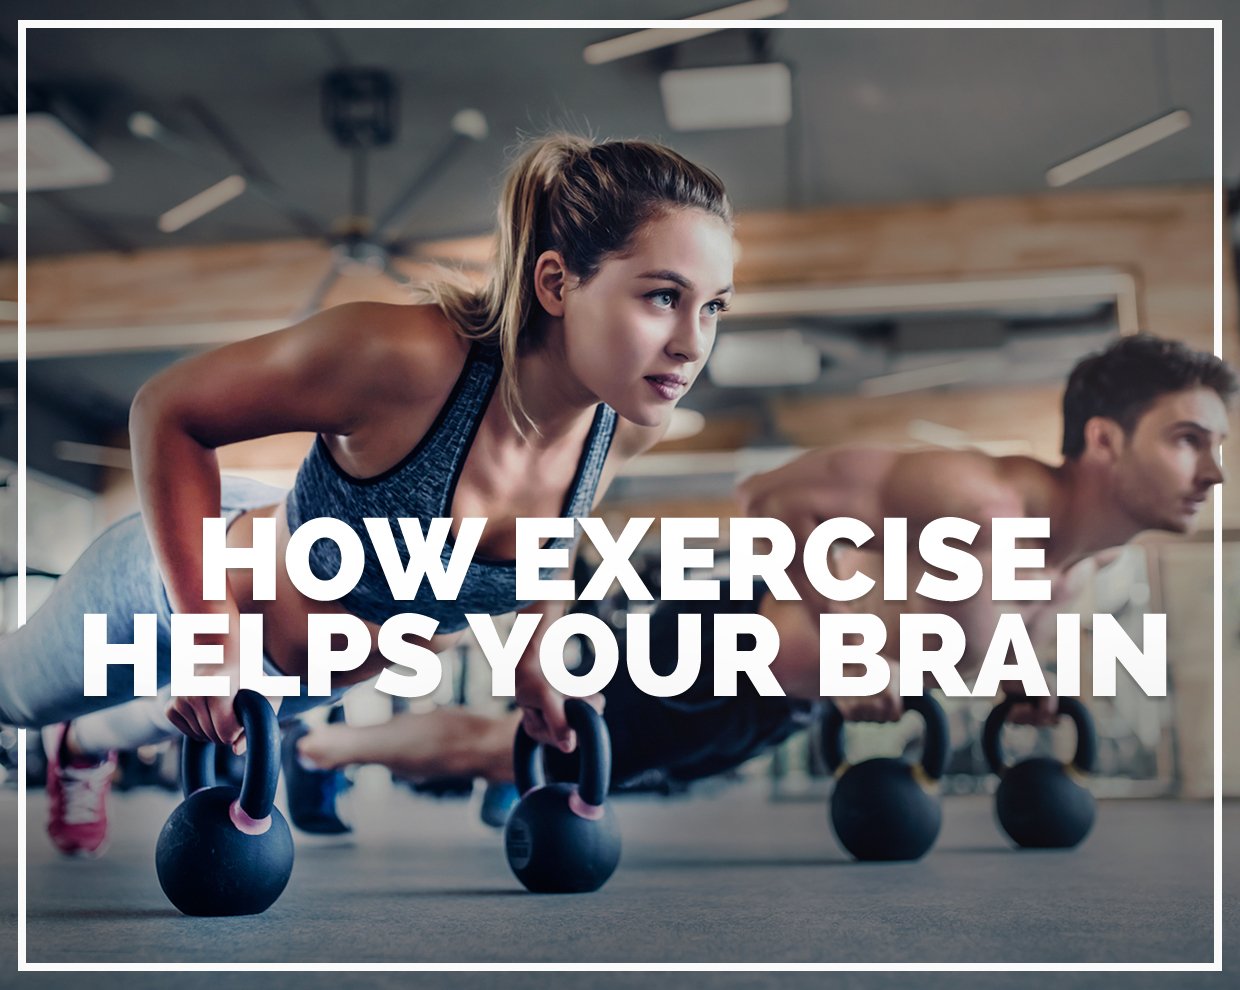 How exercise helps your brain, memory and cognitive ability